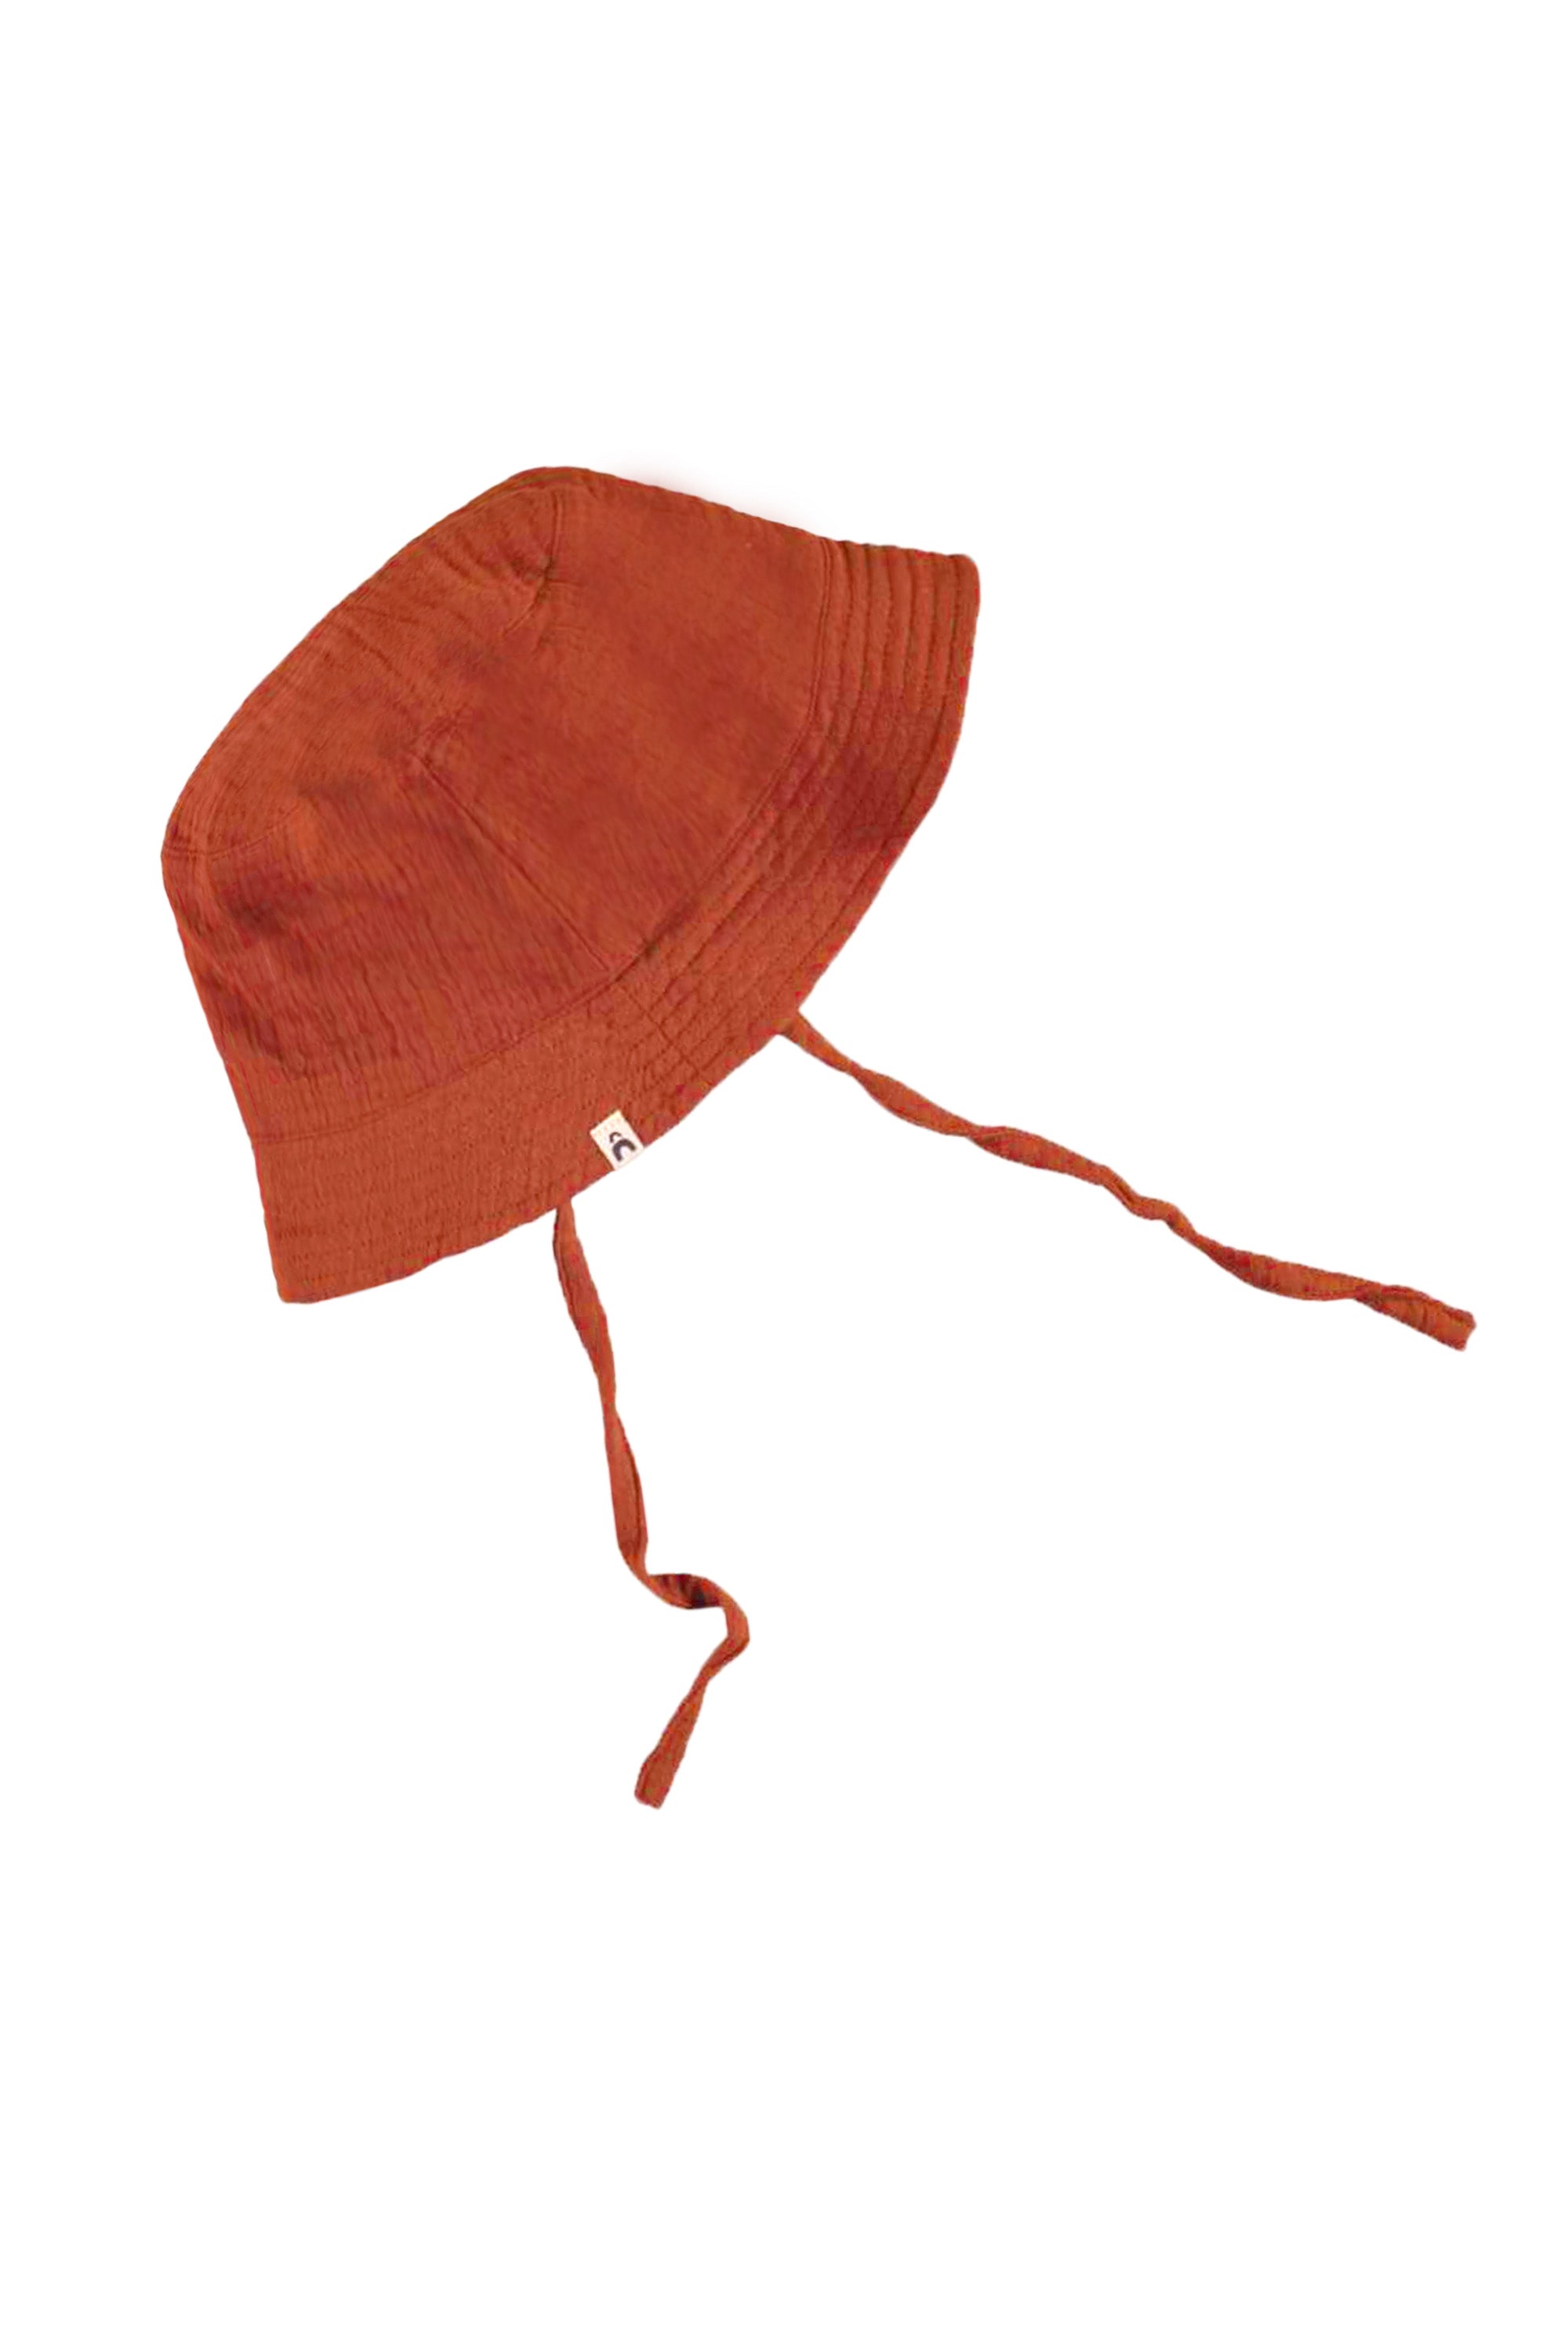 The New Chapter Woven muslin bucket hat